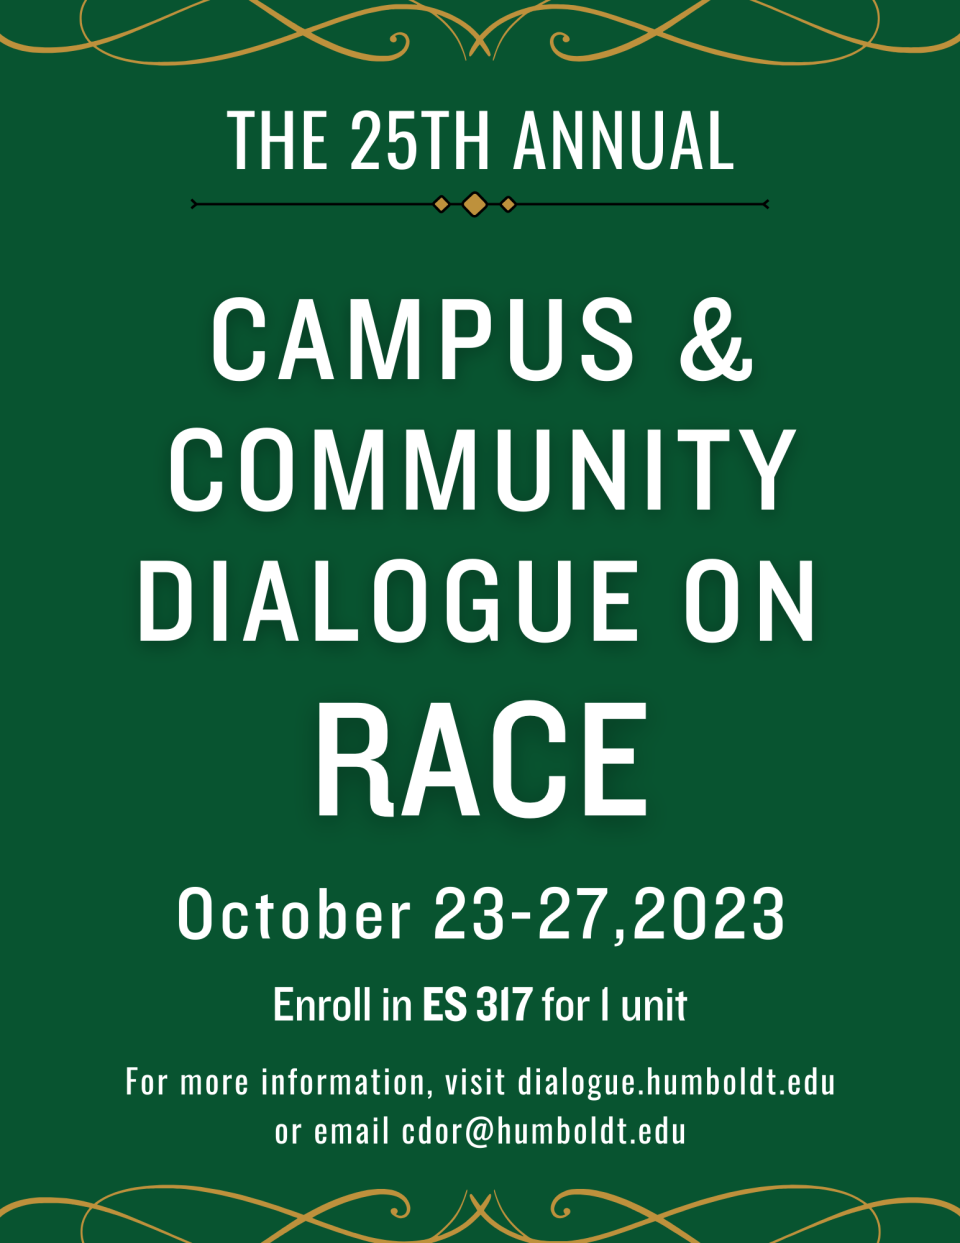 25th Annual Campus and Community Dialogue on Race October 23-27 Save the Date Flier